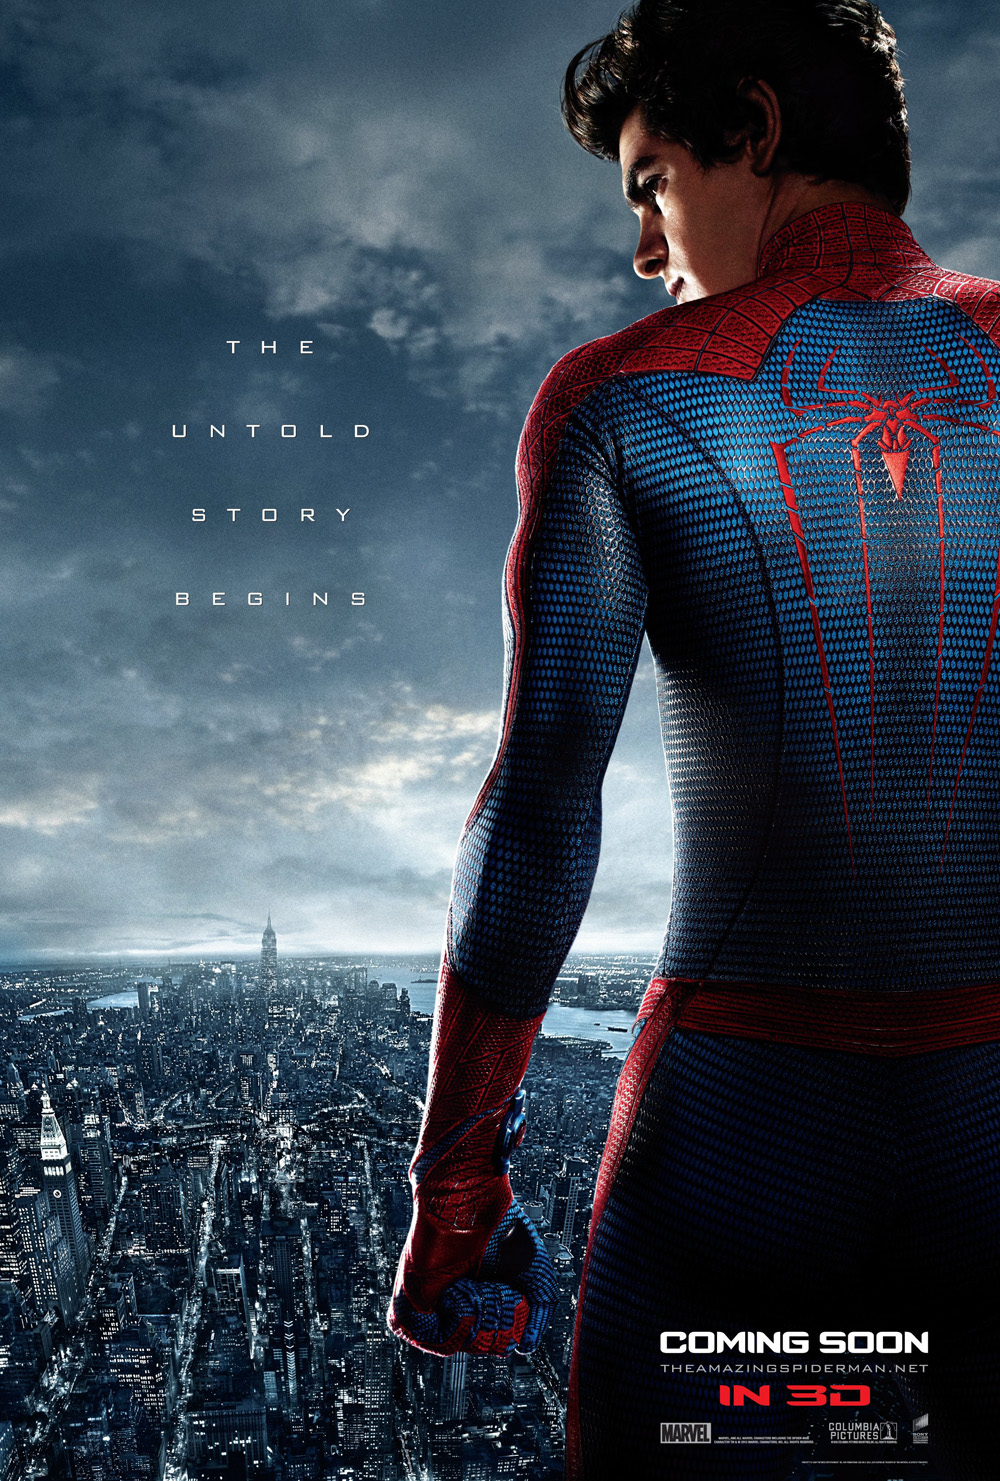 3rd trailer of "The Amazing SpiderMan" hits the web! LionhearTV